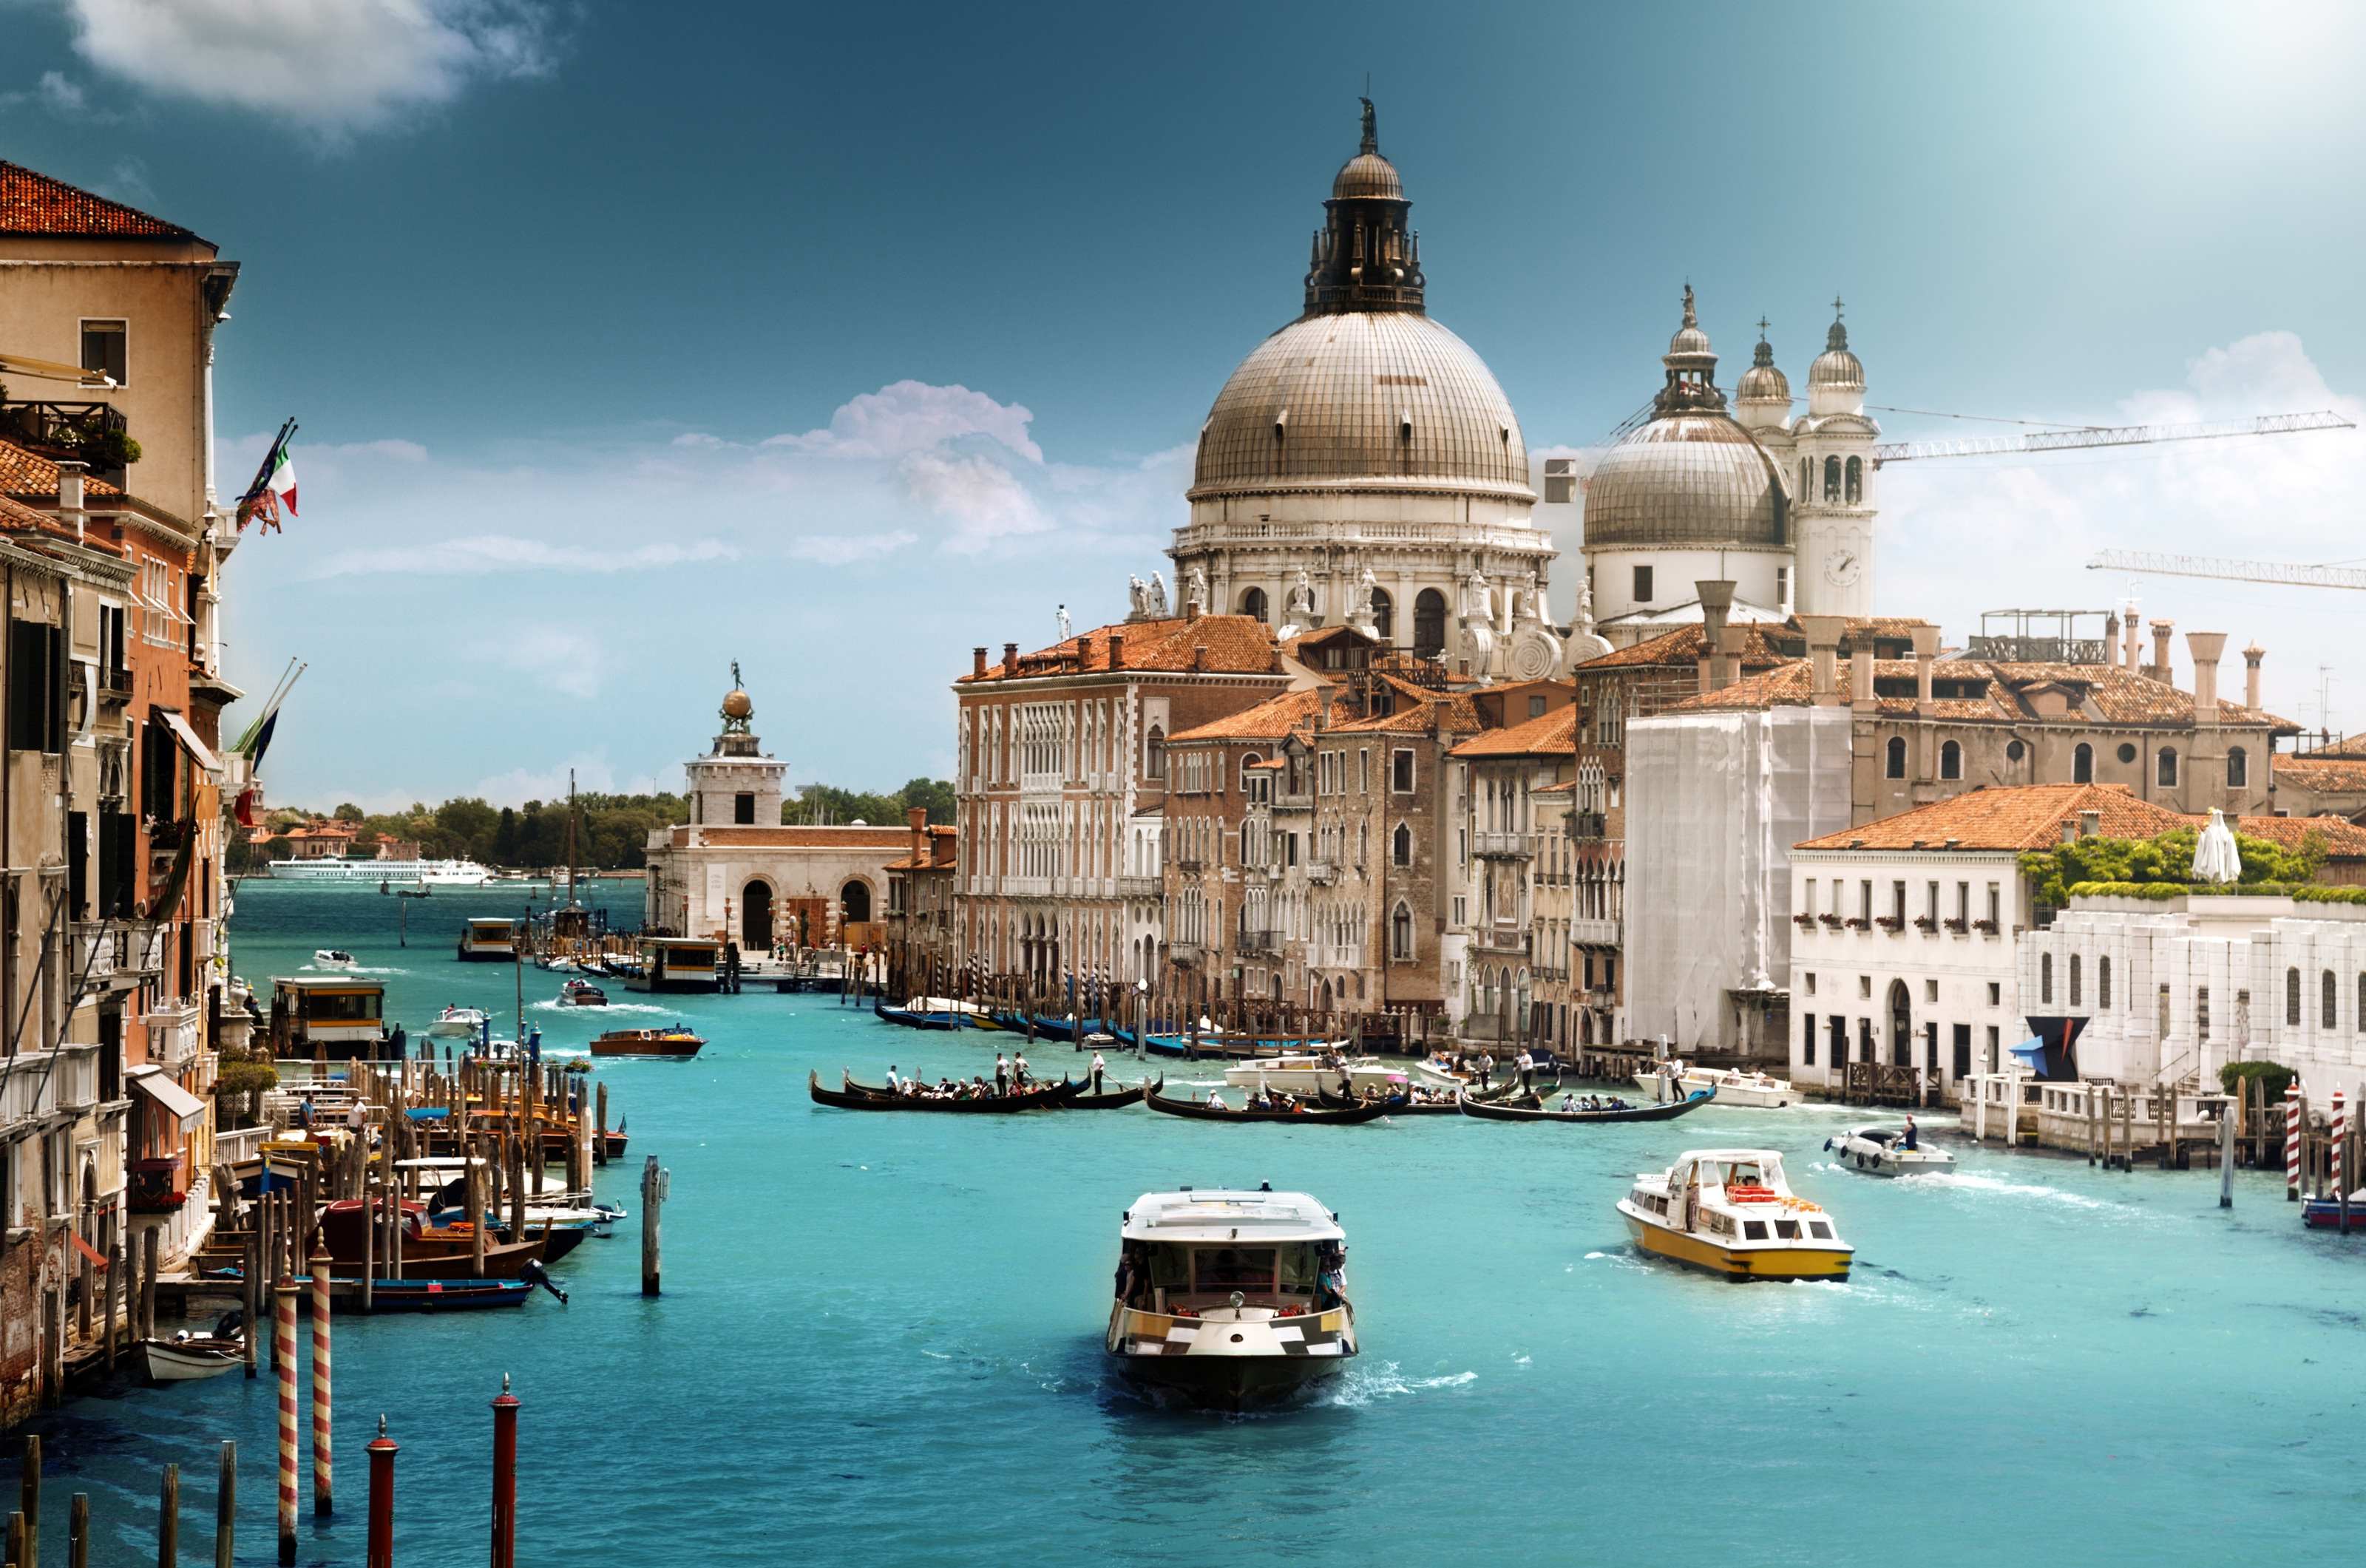 Grand Canal In Italy Wall Mural - Murals Your Way